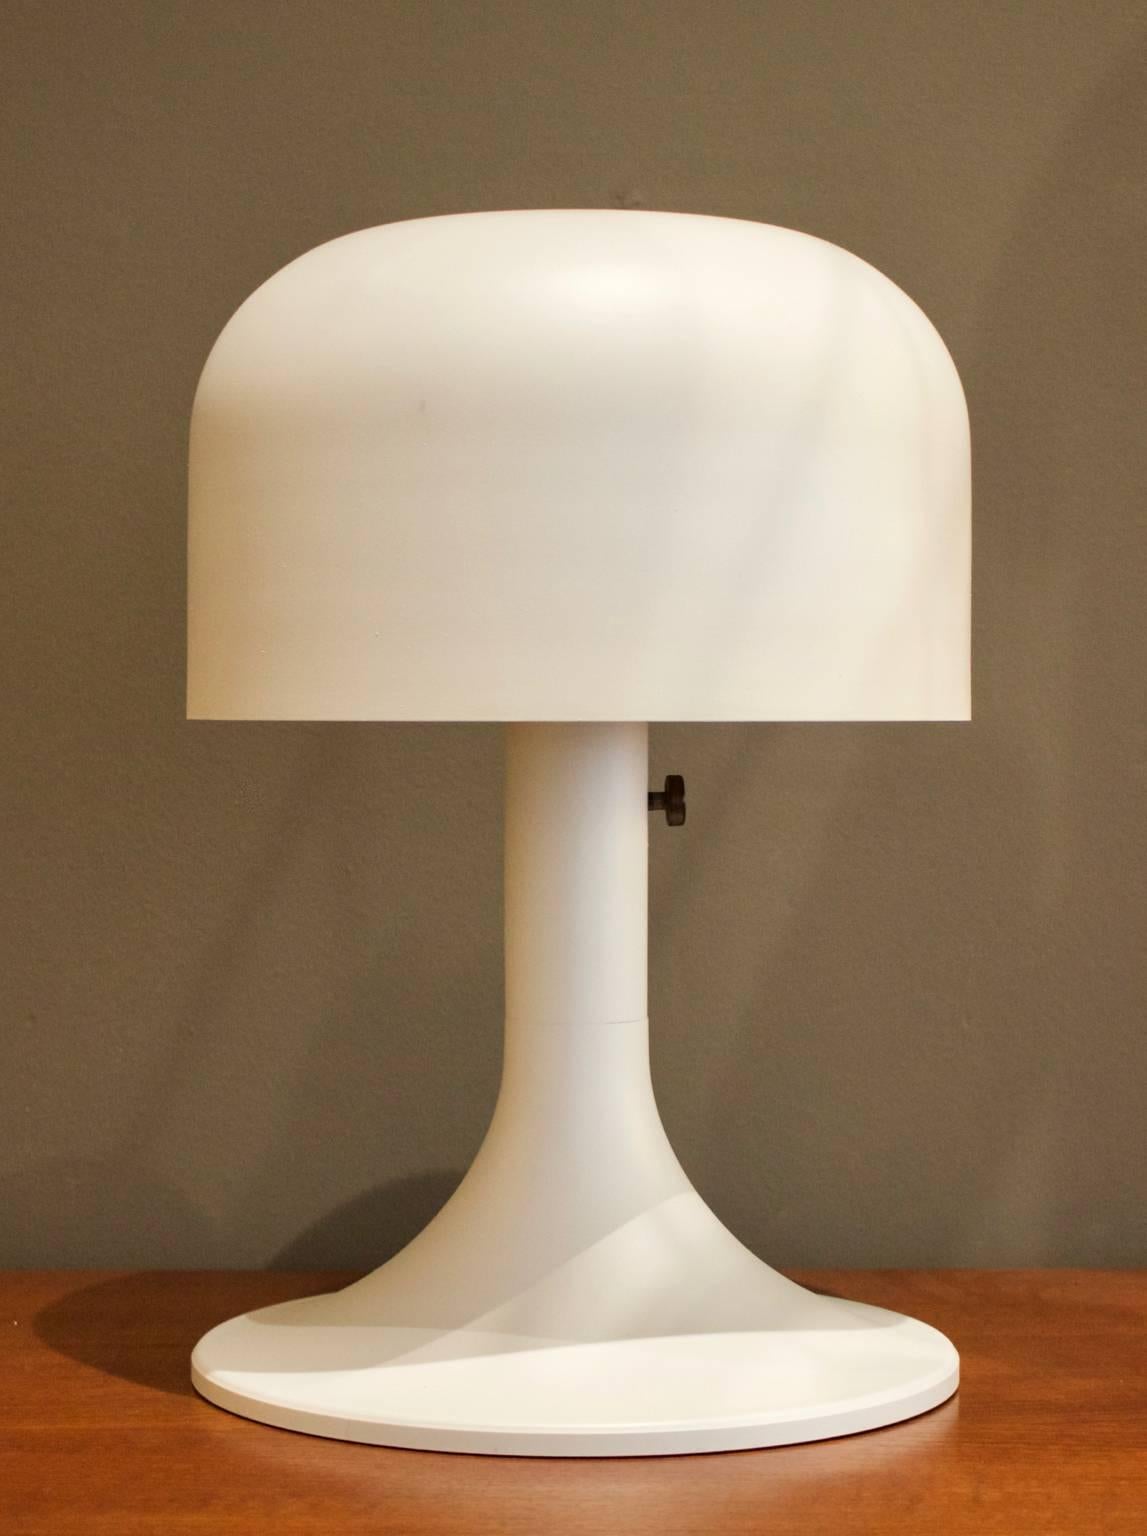 Table lamp with spun aluminium mushroom shade over a tulip base. 

Redolent of designs by Stilnovo, Guzzini or Sonneman, this is a simple piece, nicely made and a little heavier than its style suggests. The light from the bulb emerges above and